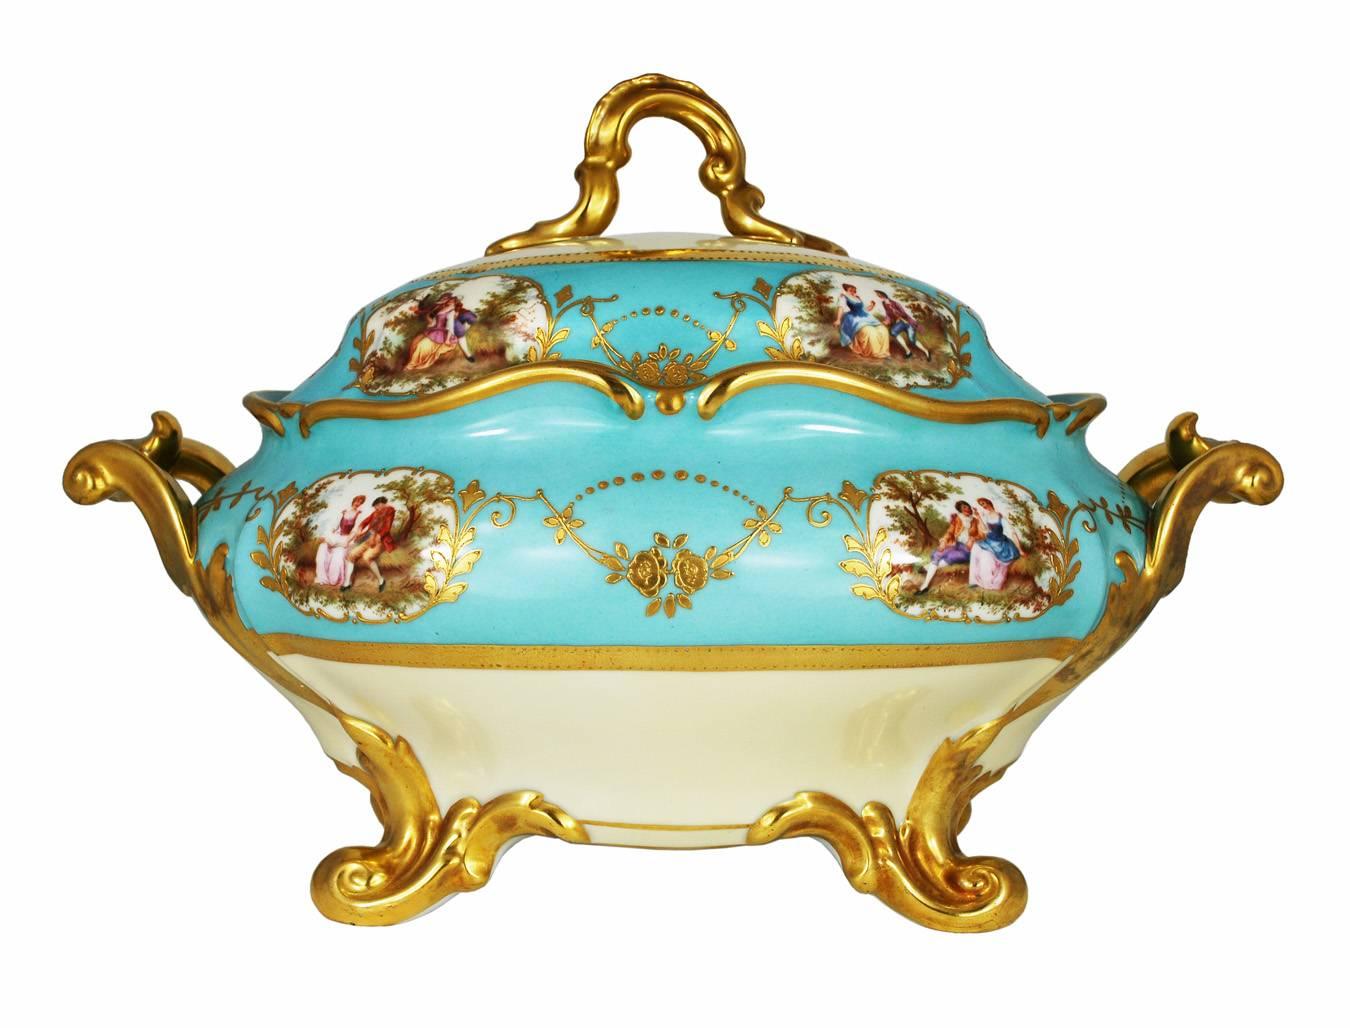 A large beautiful porcelain tureen with a plate in Celeste aqua blue color with gold painted decoration made by Thomas Bavaria. 

The tureen has four romantic courtship scenes on the body and four on the lid, along with gold painted floral swags